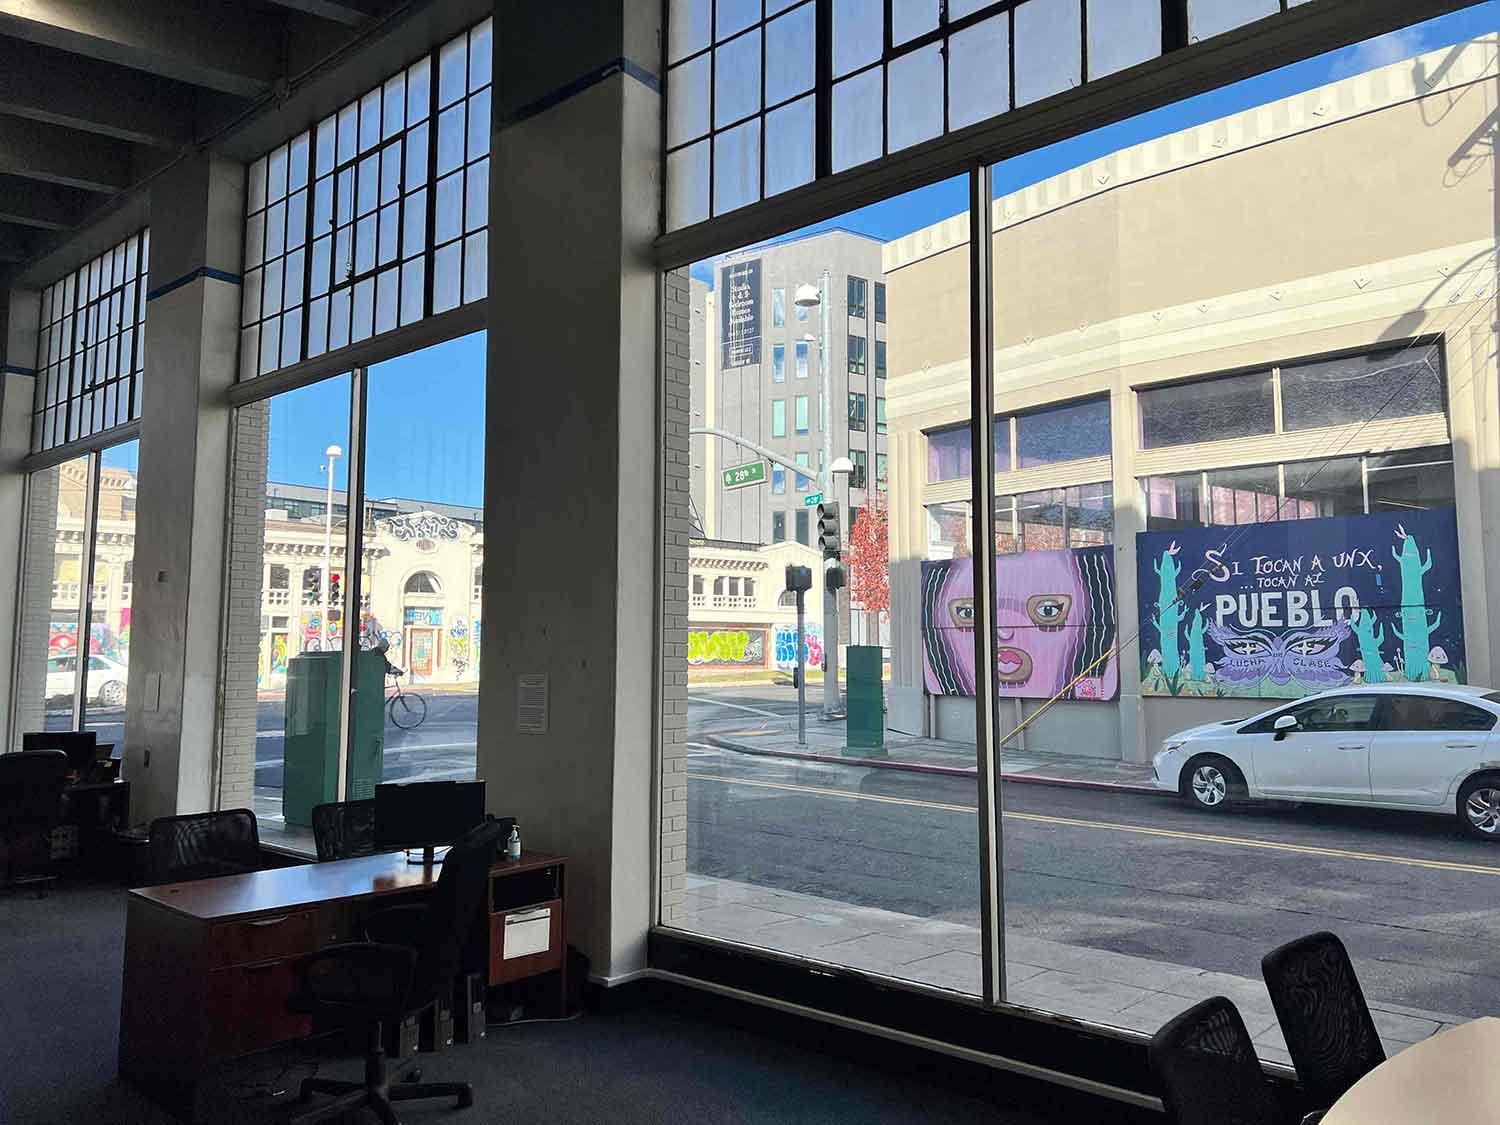 ClimatePro installed 3M Ultra Safety Window Film for a car dealership in Oakland, CA. Get a free safety window film estimate for your Bay Area business.